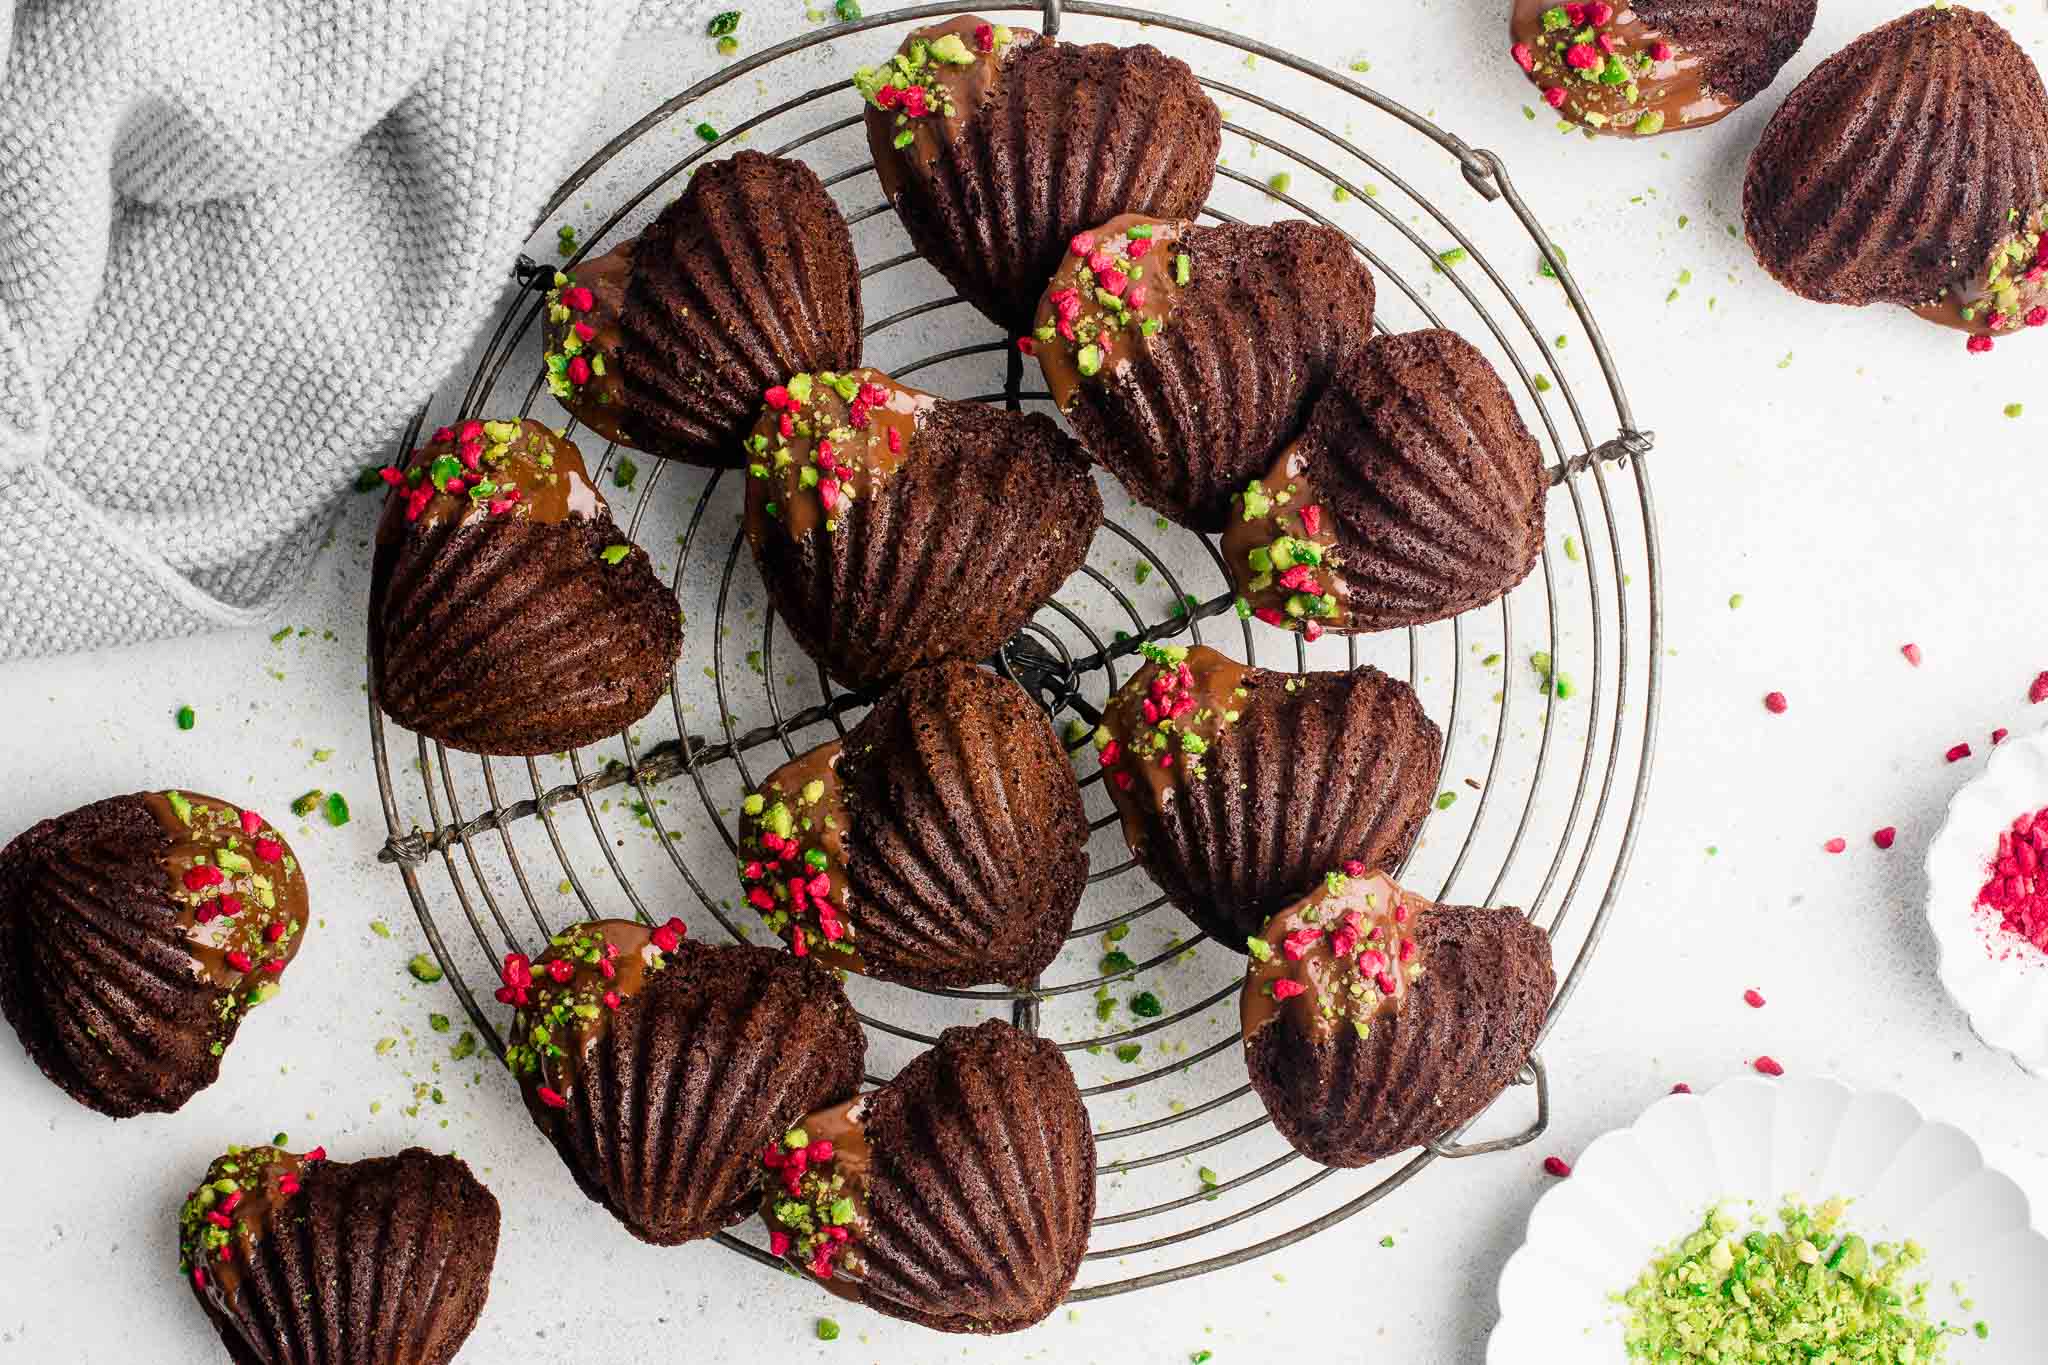 chocolate madeleines dipped in chocolate with pistachios and raspberries